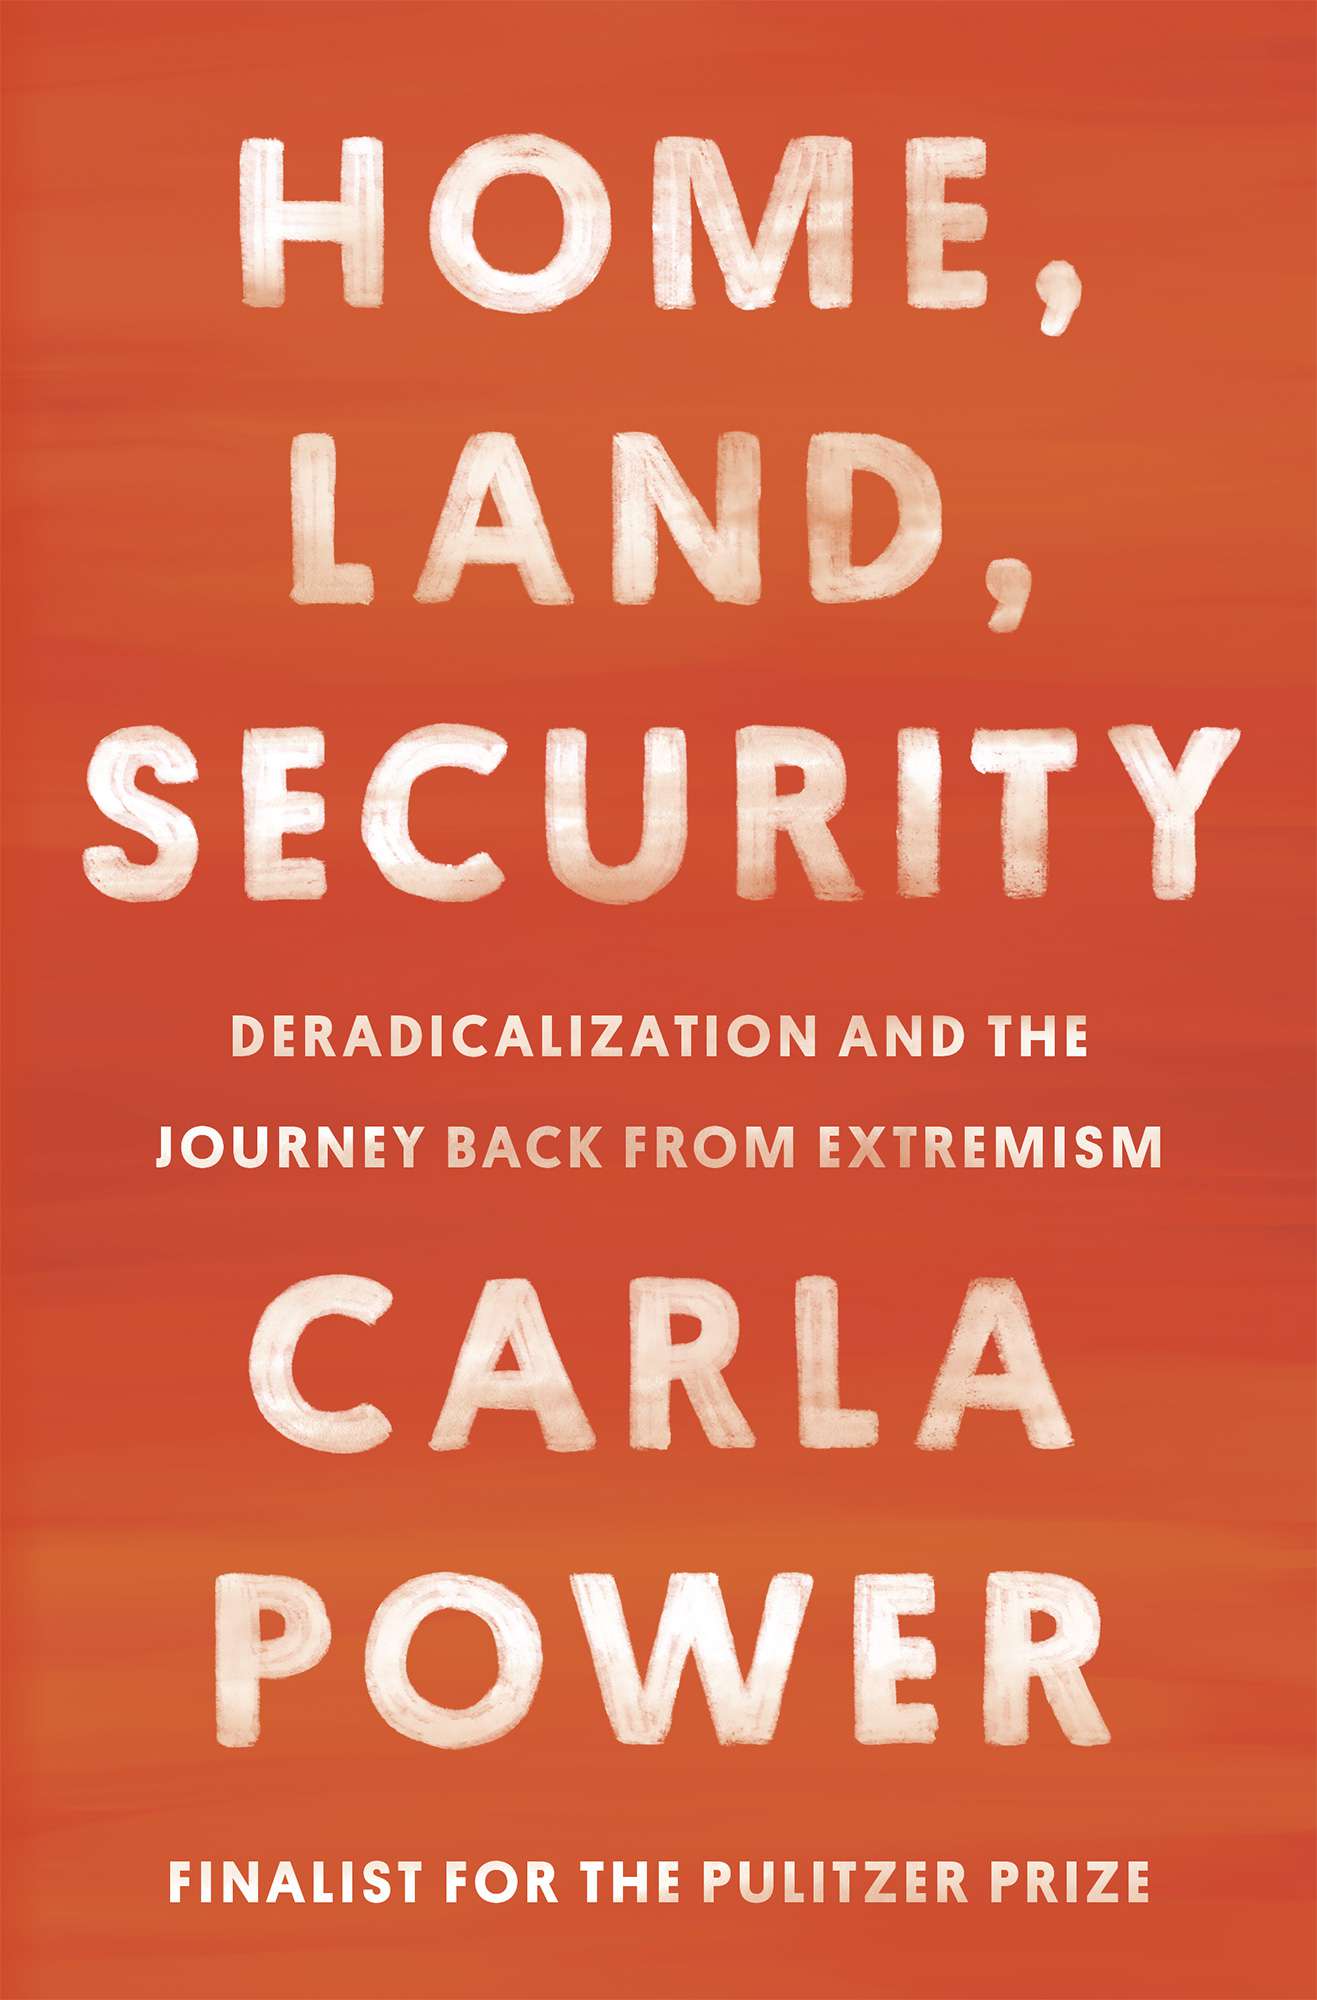 Home, Land, Security, by Carla Power